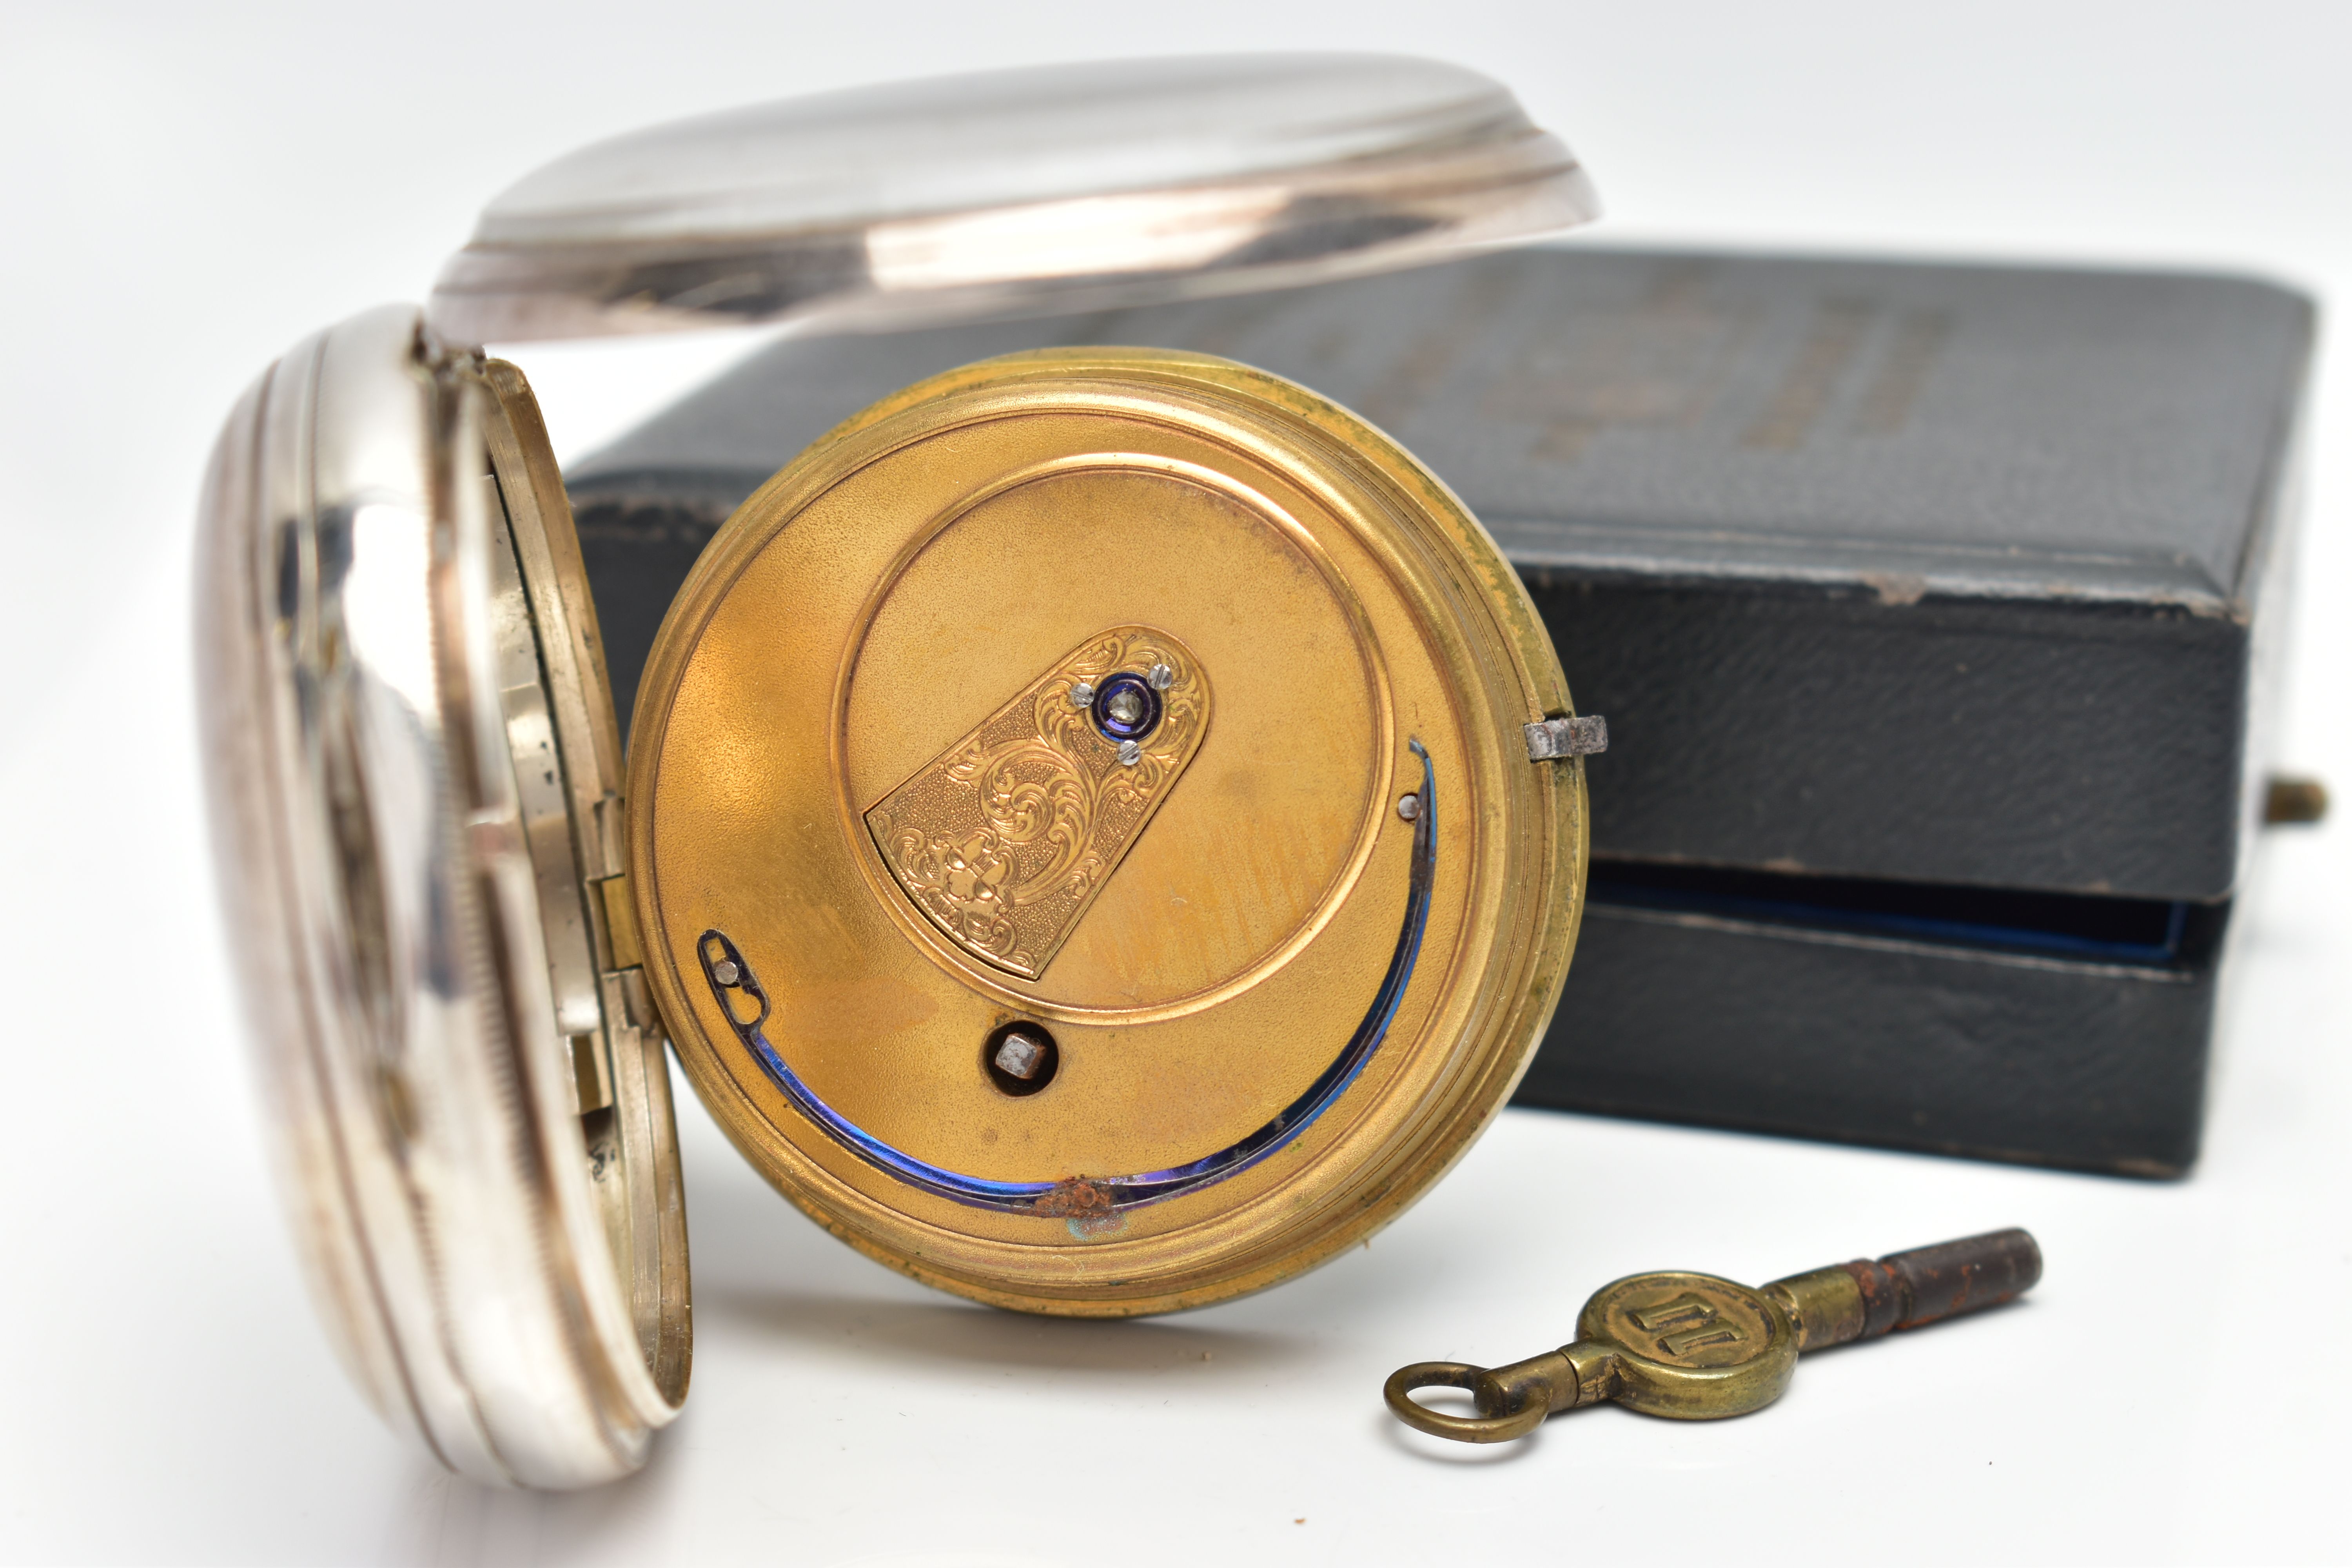 A CASED SILVER OPEN FACE POCKET WATCH, key wound, round cream dial signed 'Improved Patent', large - Image 6 of 8